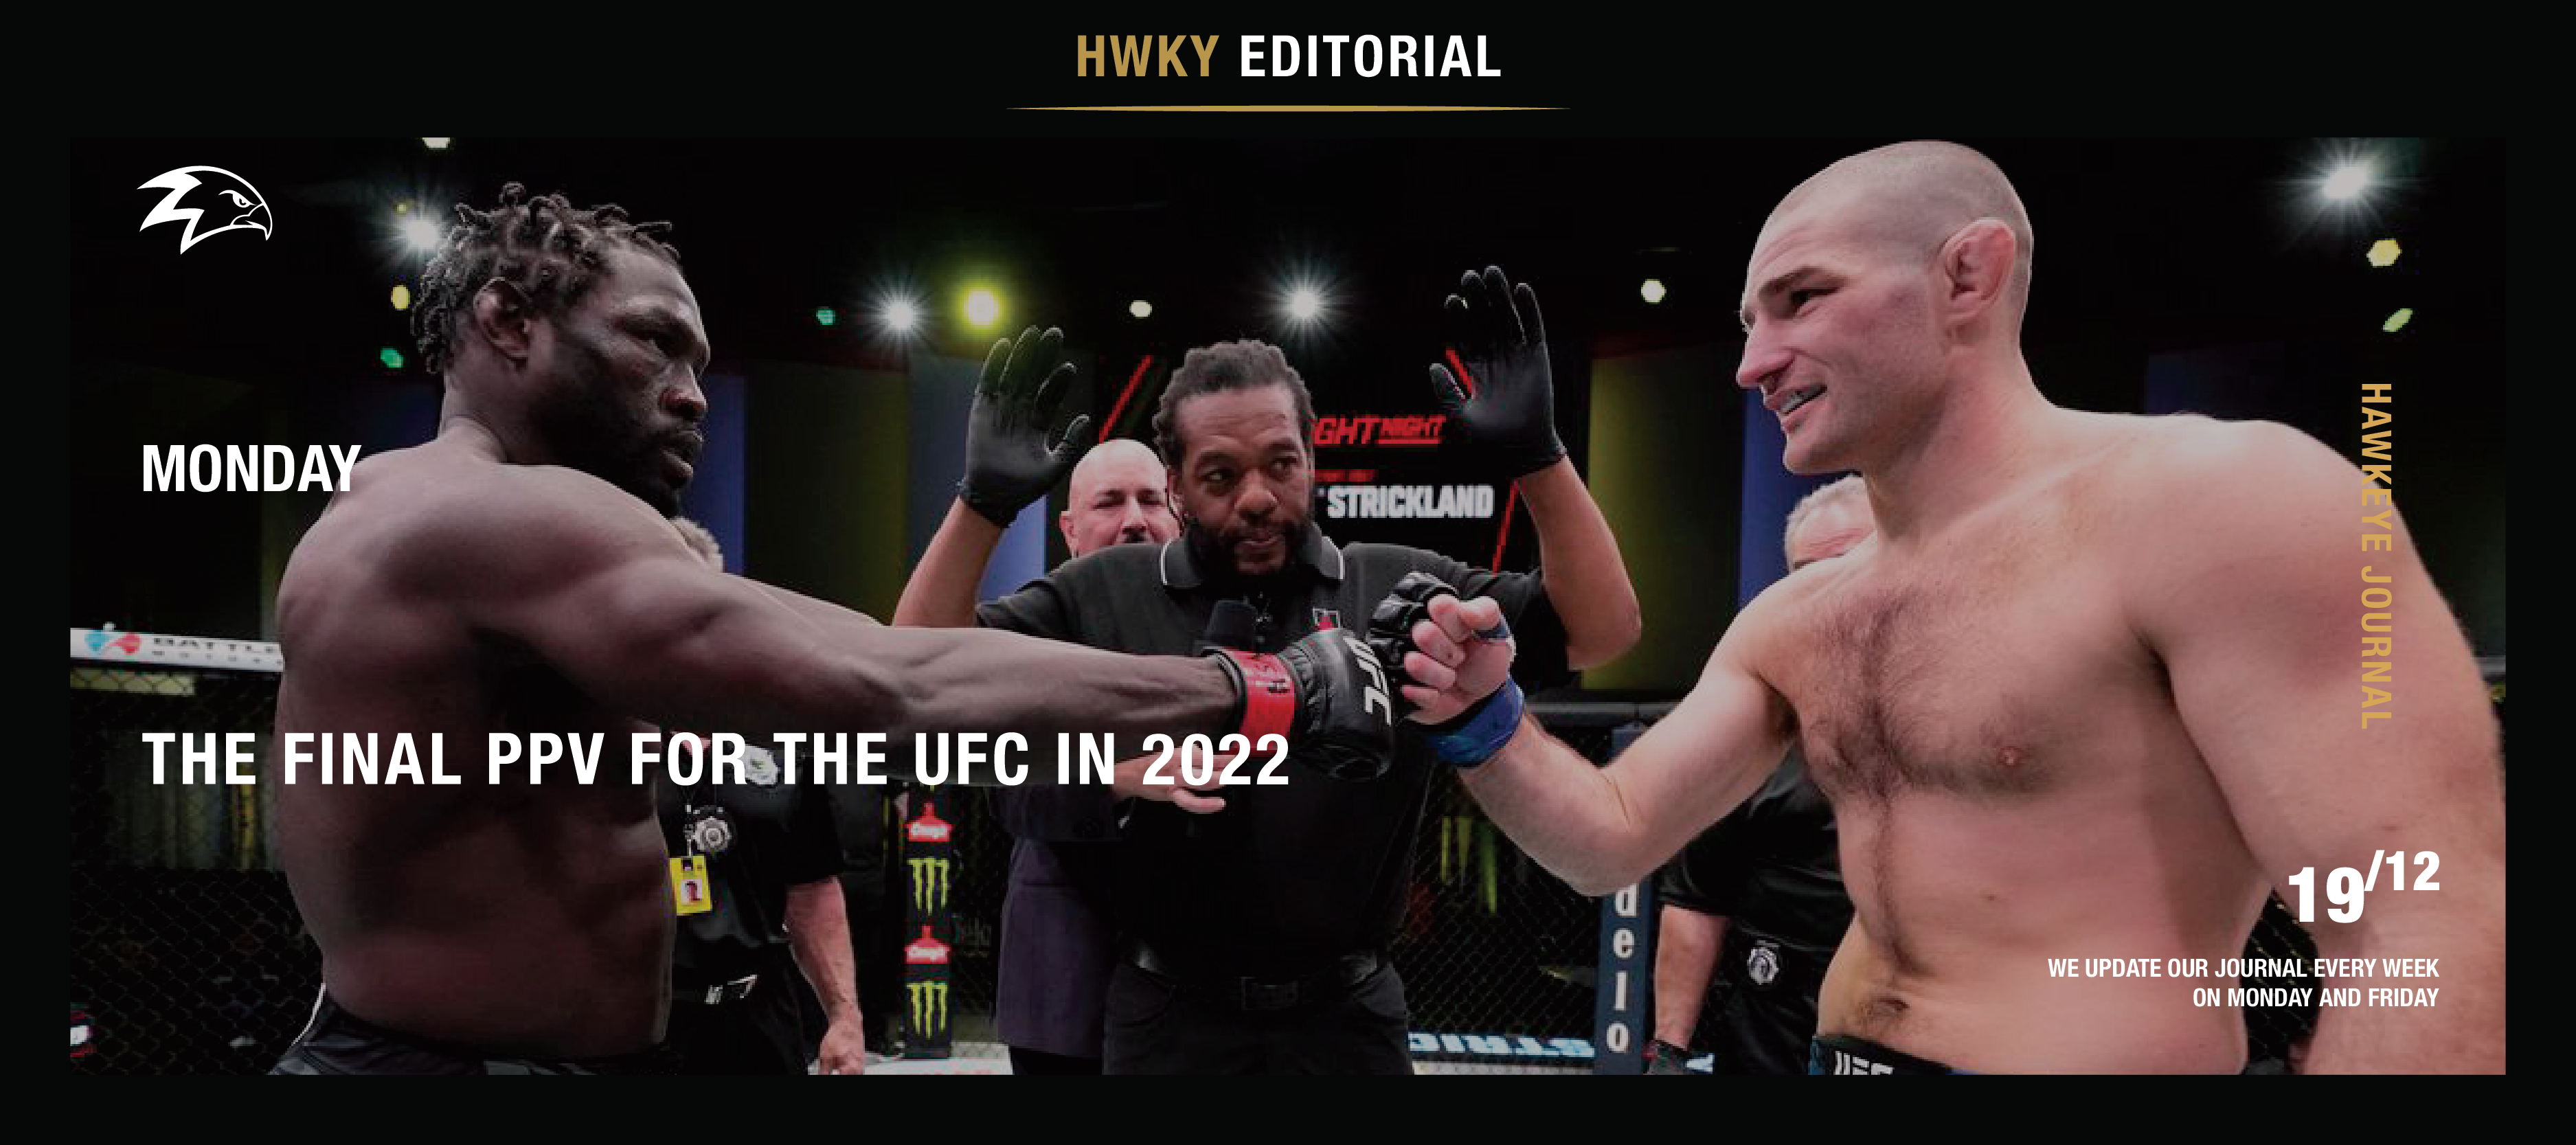 The Final PPV For The UFC In 2022